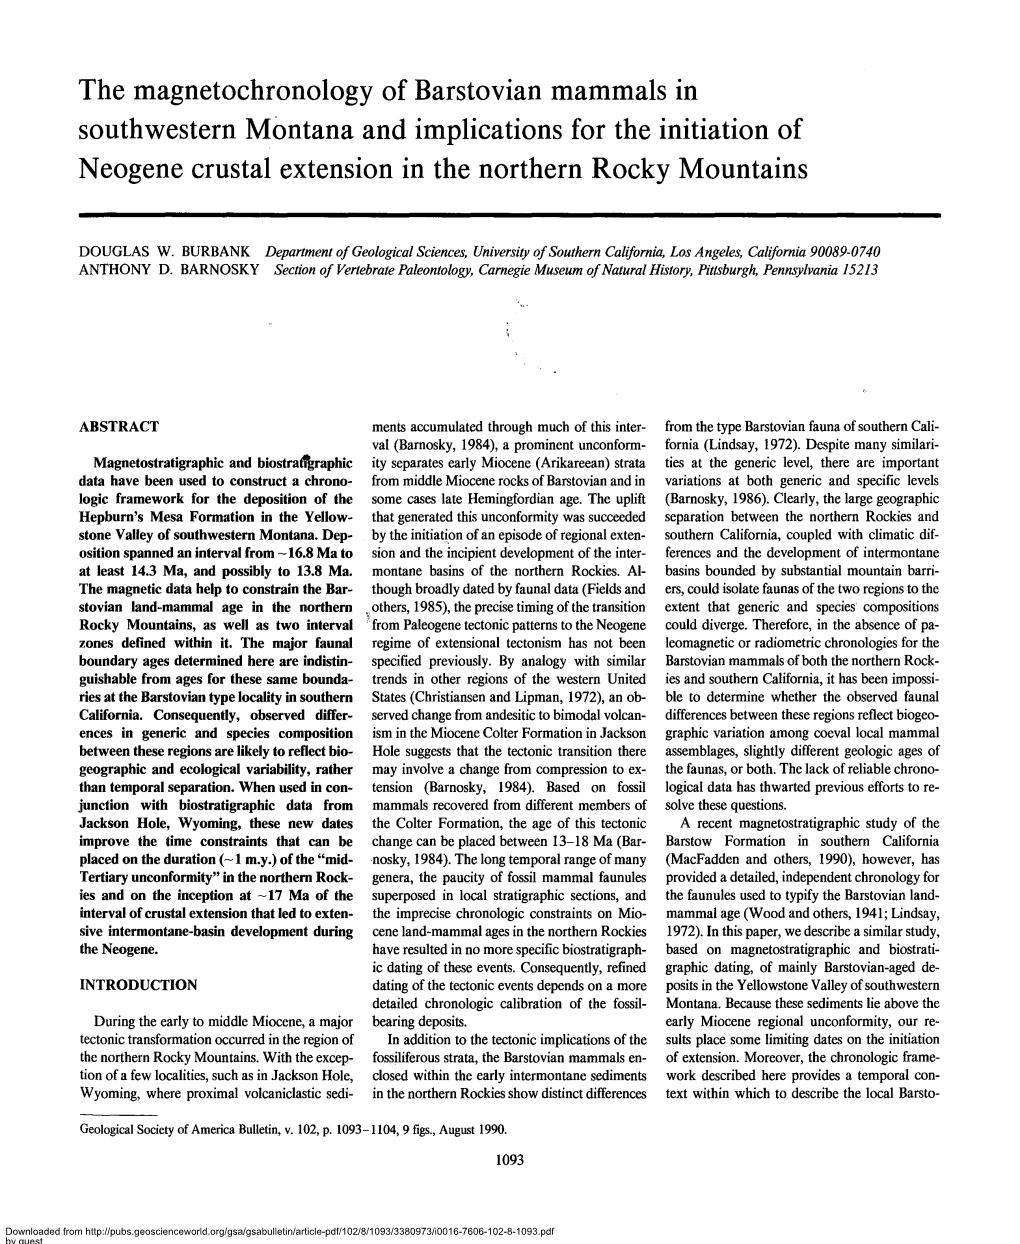 The Magnetochronology of Barstovian Mammals in Southwestern Montana and Implications for the Initiation of Neogene Crustal Extension in the Northern Rocky Mountains